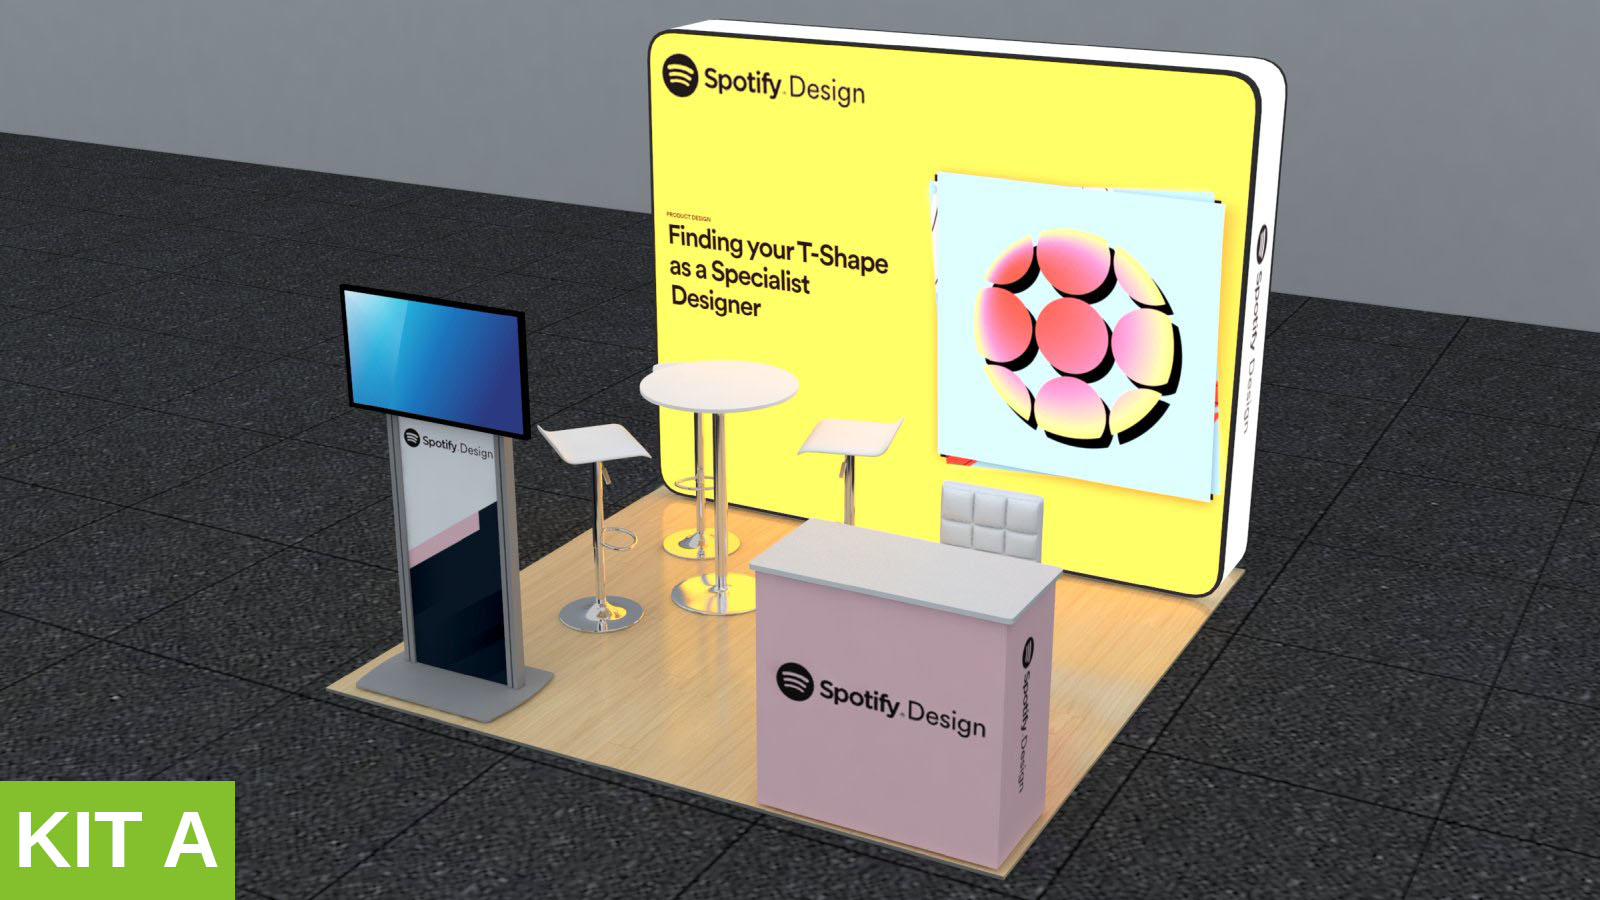 A Spotify Booth 10x10 1600px kit A